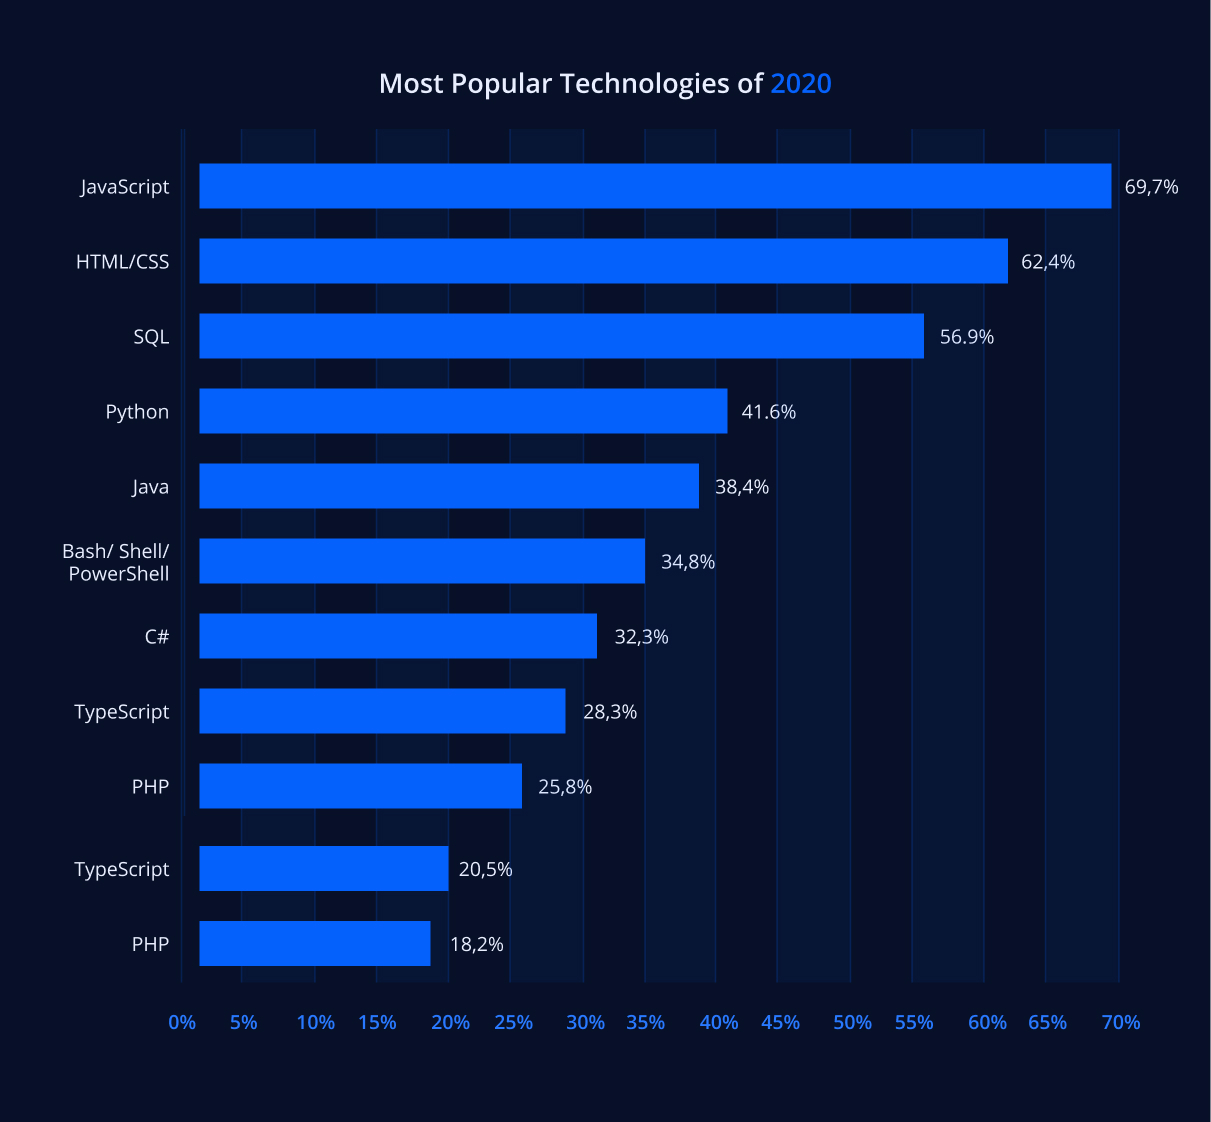 Most popular technologies in 2020